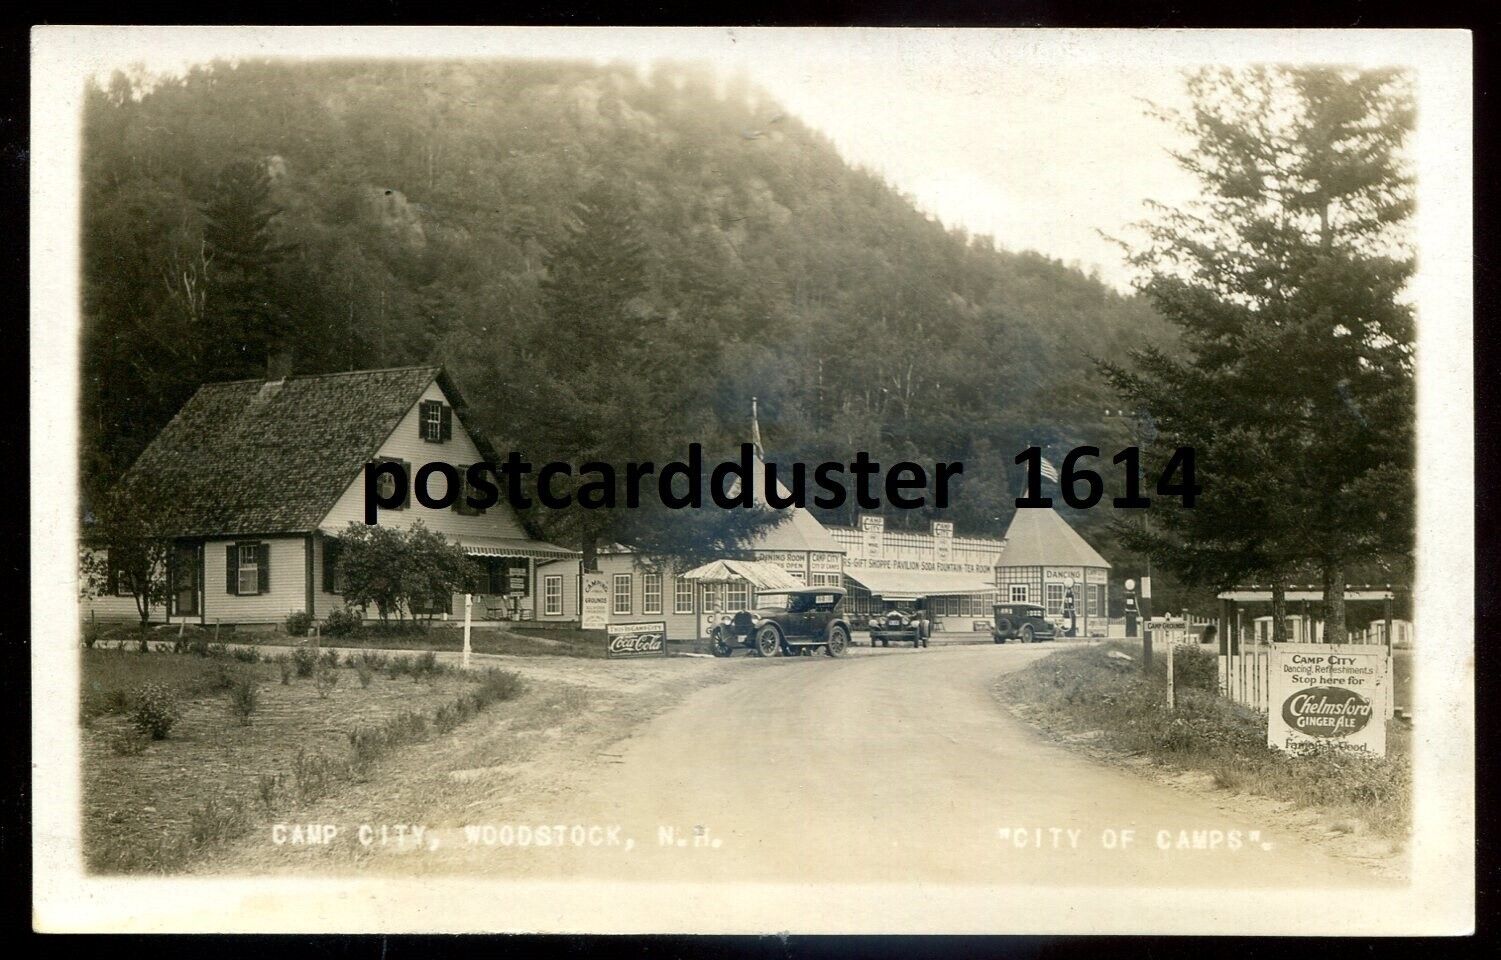 WOODSTOCK New Hampshire 1910s Camp City Coca Cola. Real Photo Postcard by Putnam